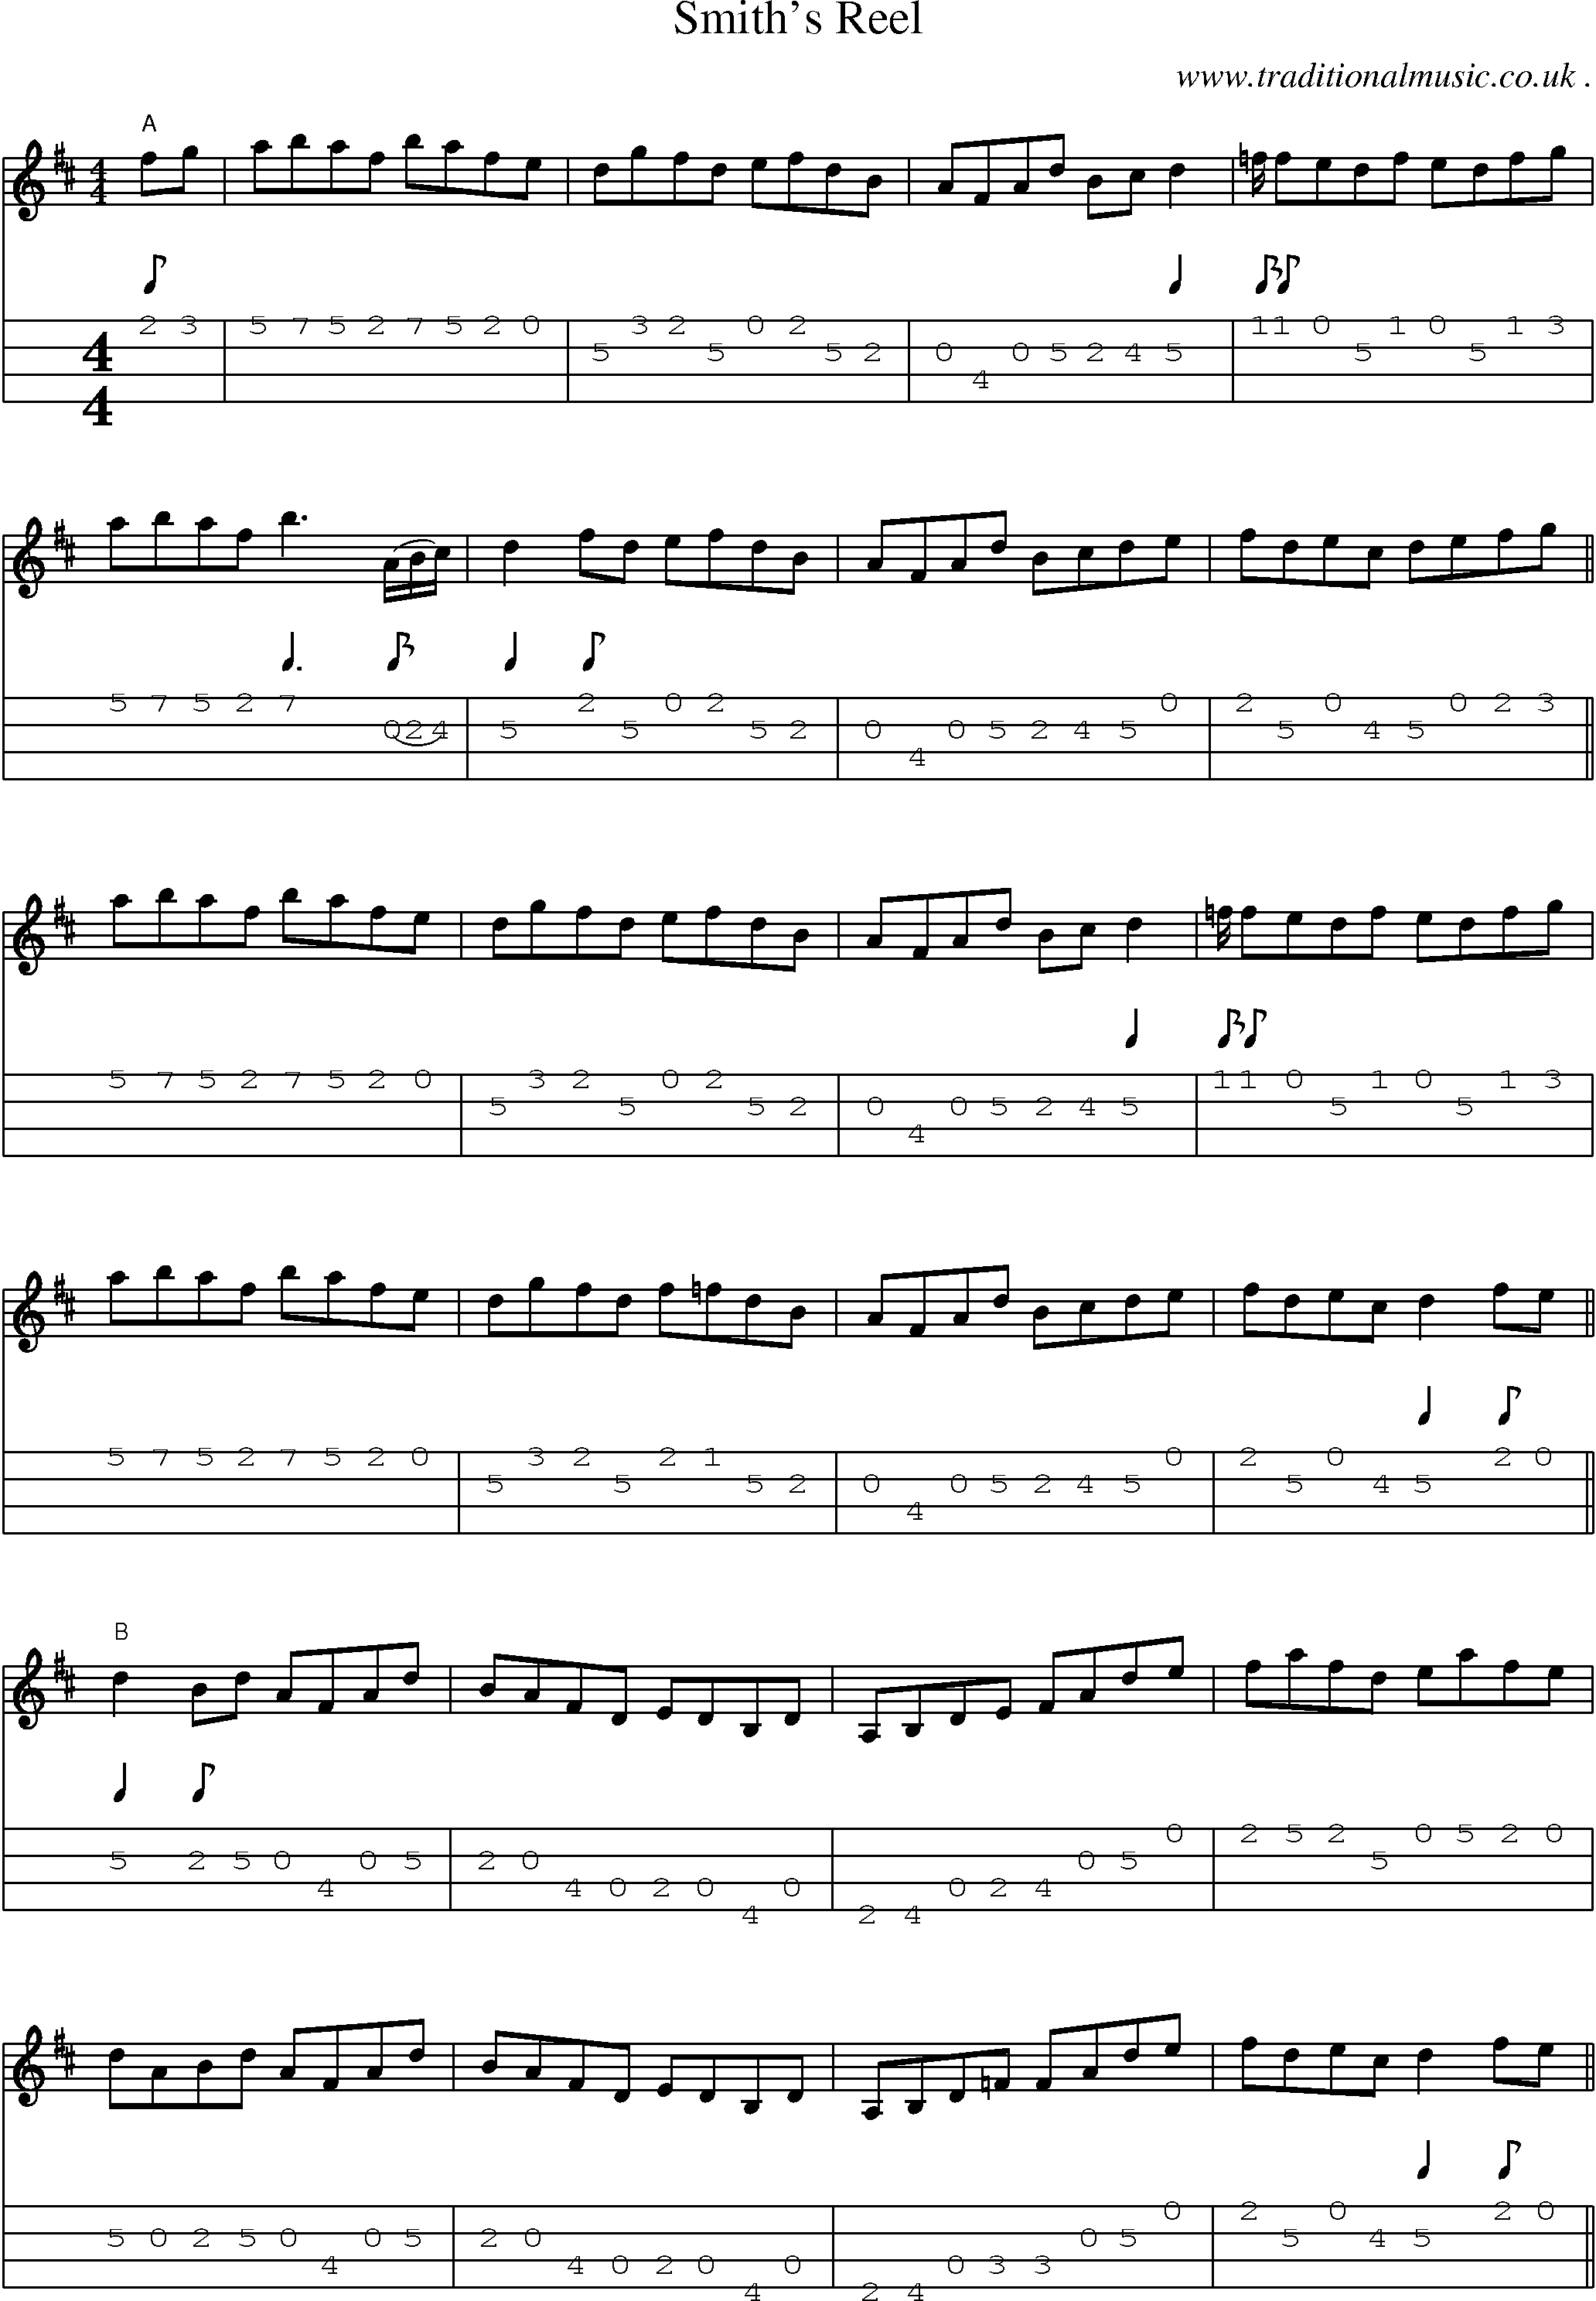 Sheet-Music and Mandolin Tabs for Smiths Reel